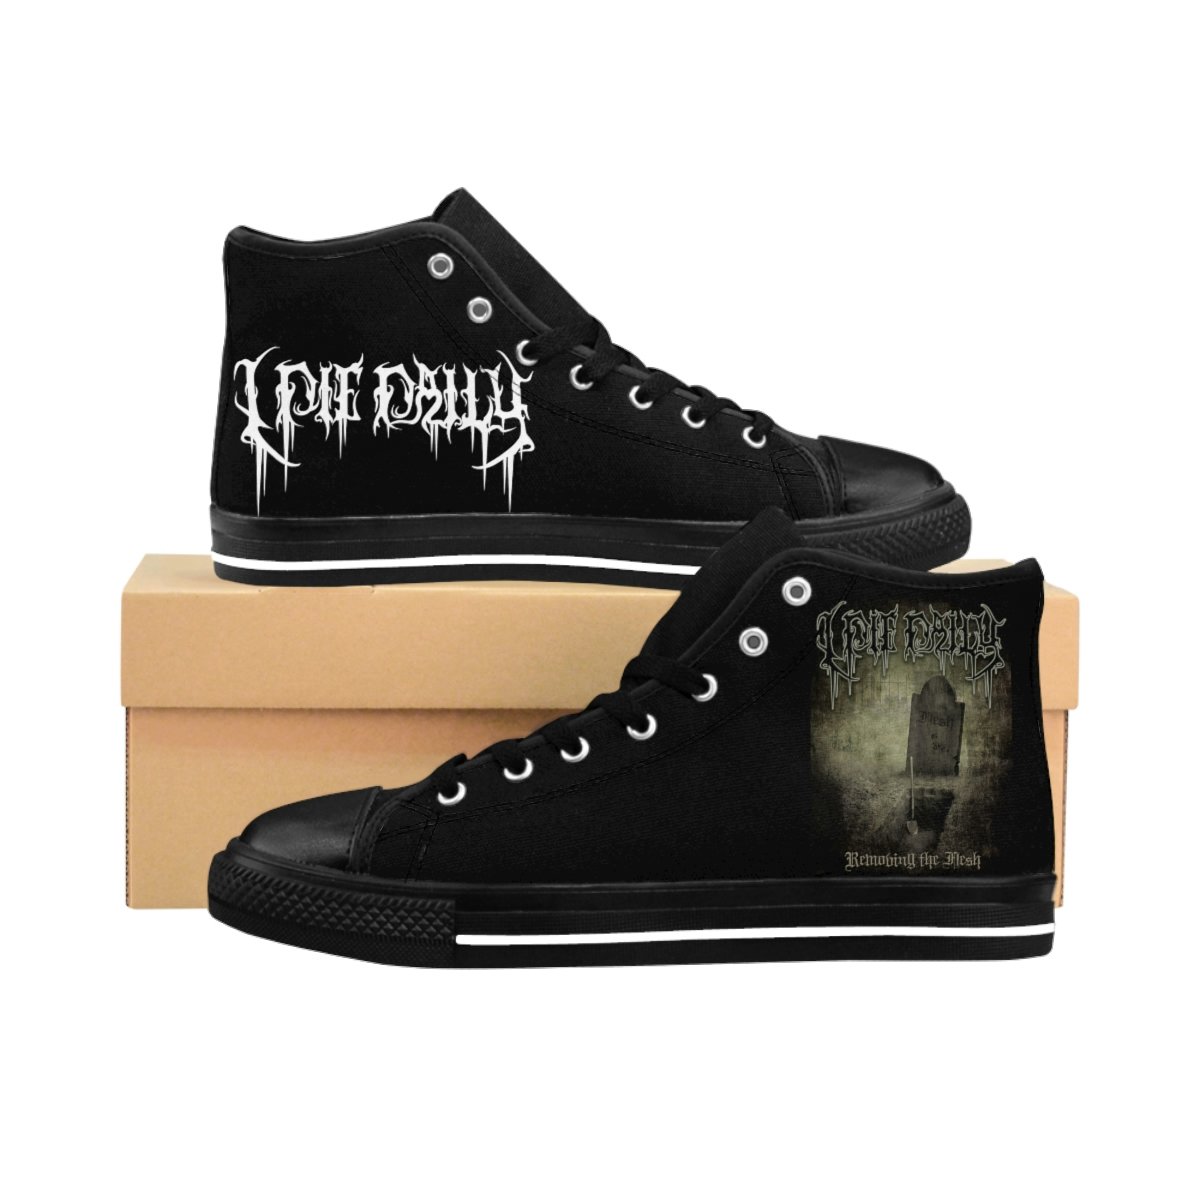 I Die Daily – Removing the Flesh Men’s High-top Sneakers W